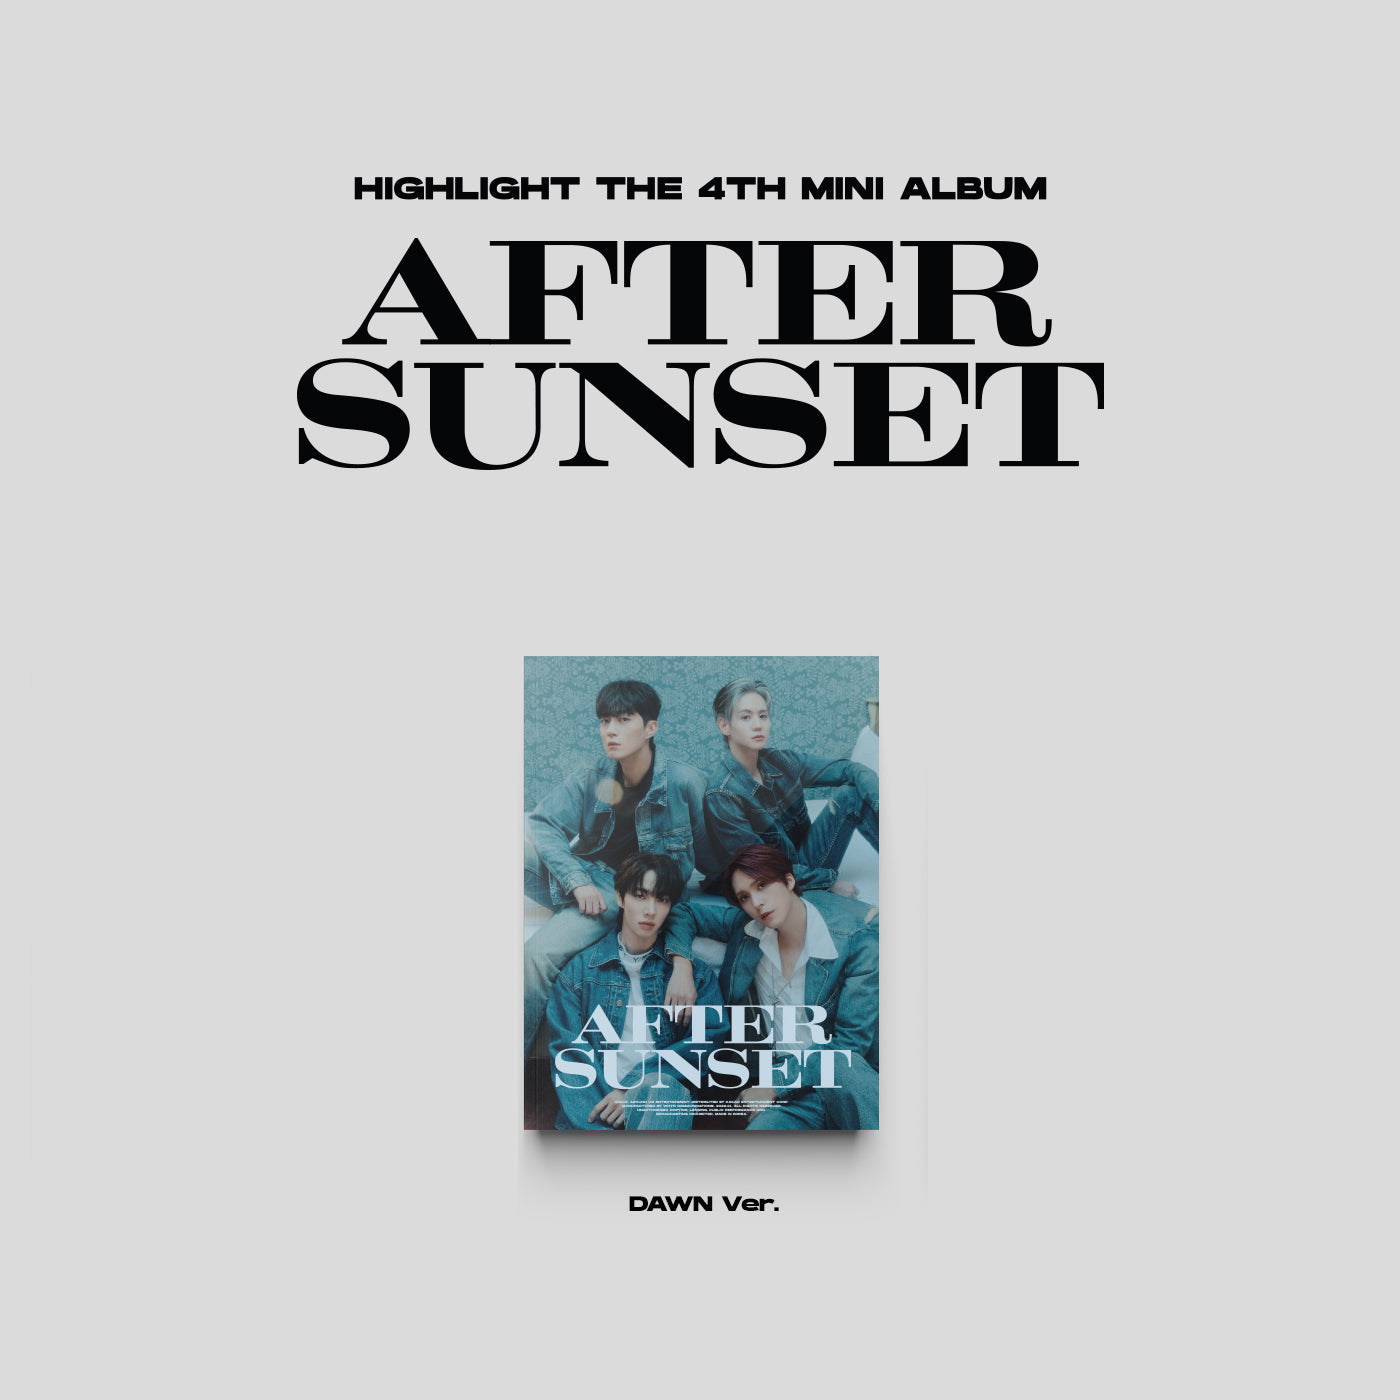 HIGHLIGHT 4TH MINI ALBUM 'AFTER SUNSET' DAWN VERSION COVER